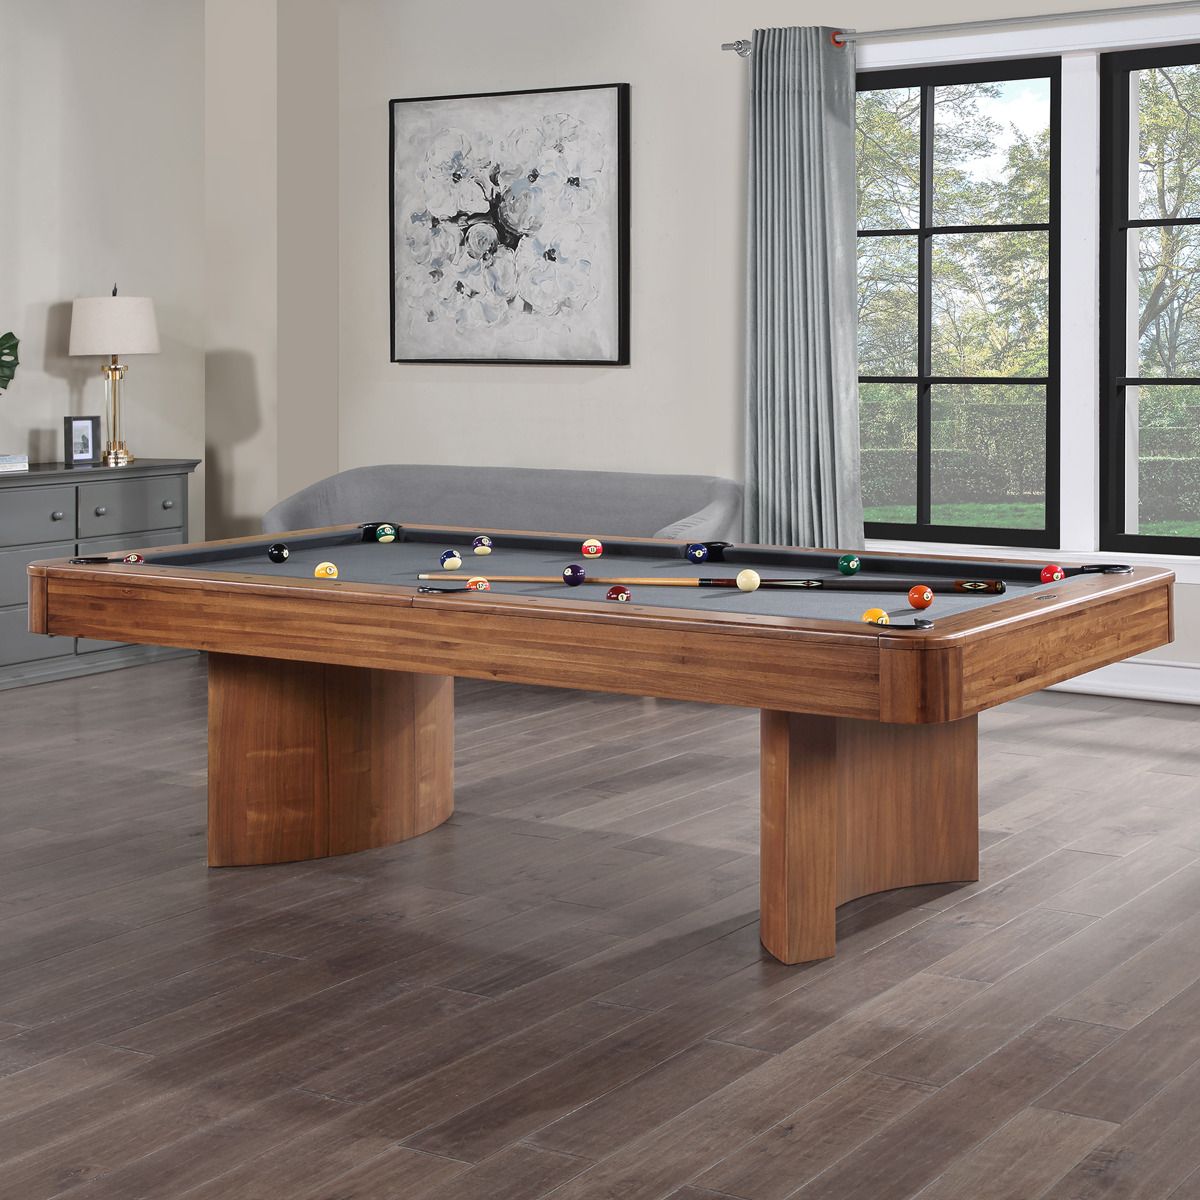 The Luna pool table by Imperial